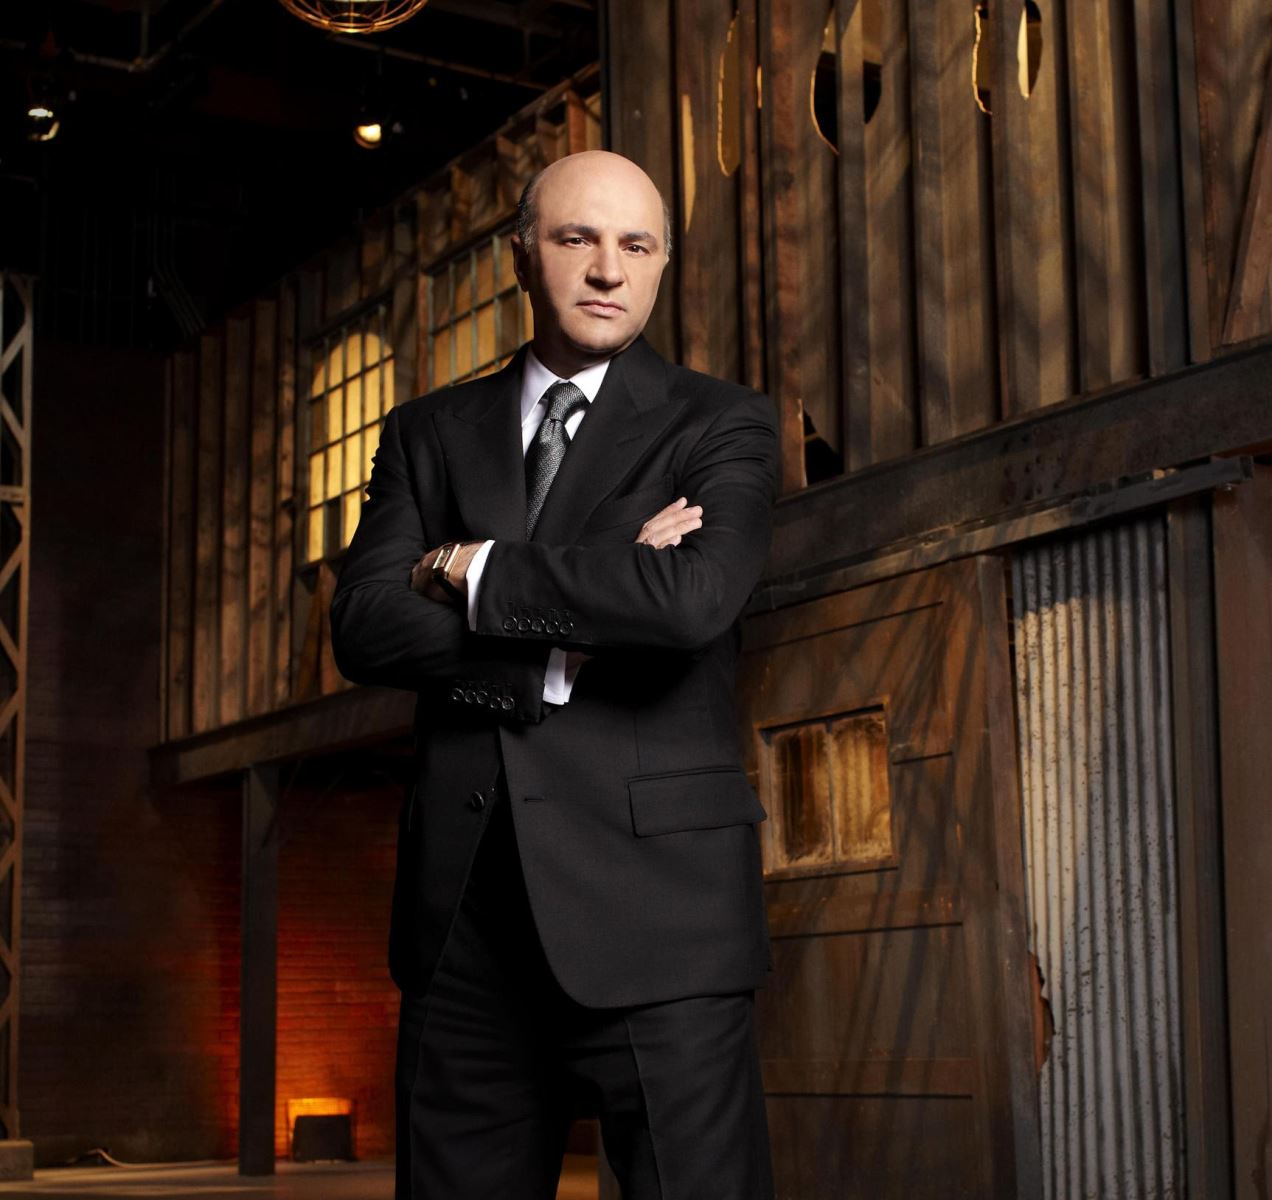 kevin o leary venture debt